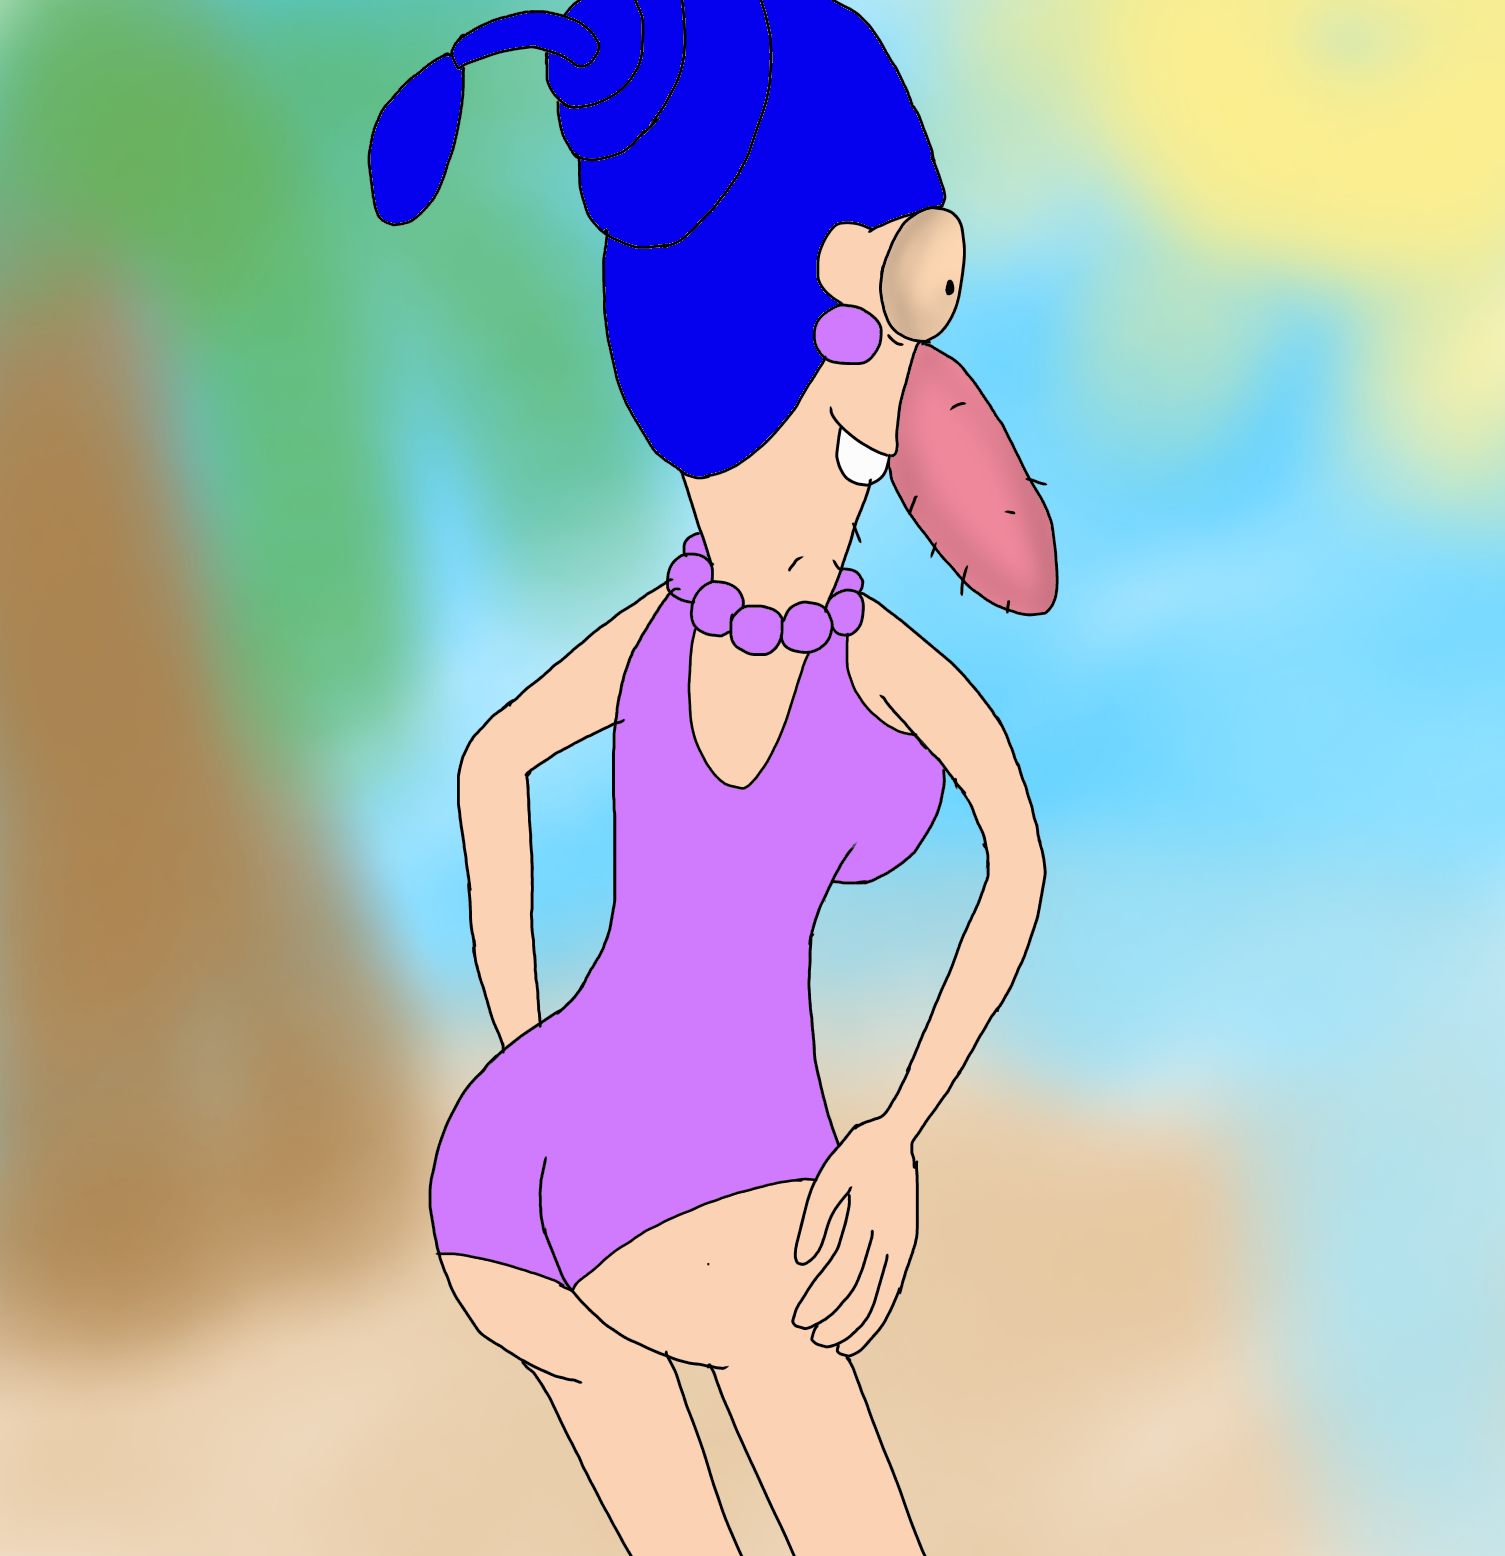 Aunt Pim booty on the Beach Swimsuit version by Lalondey